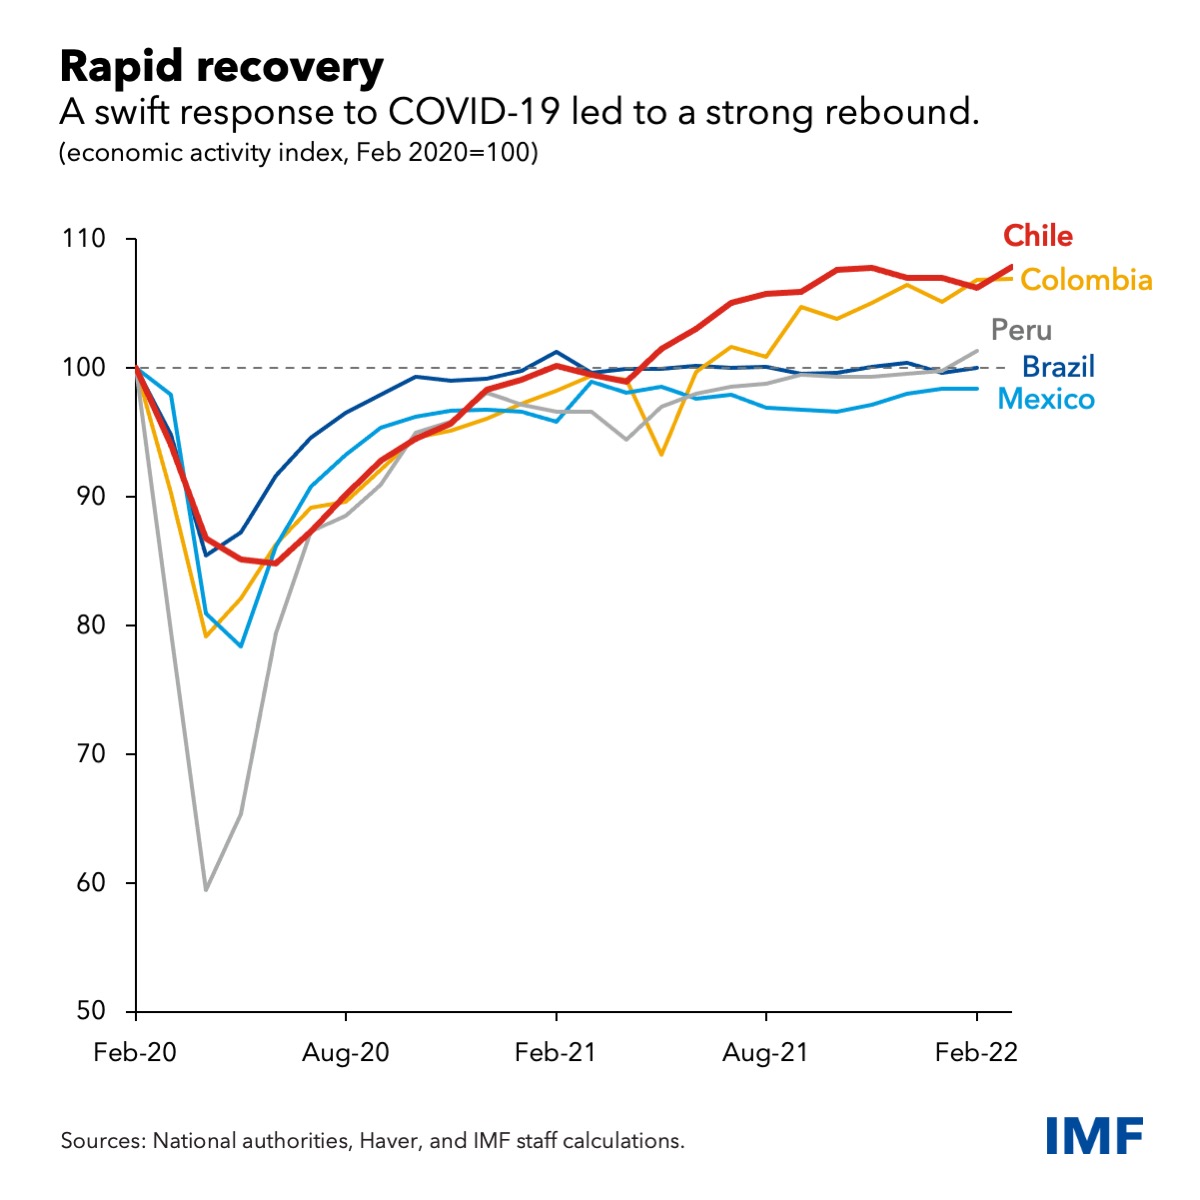 Chile: rapid recovery